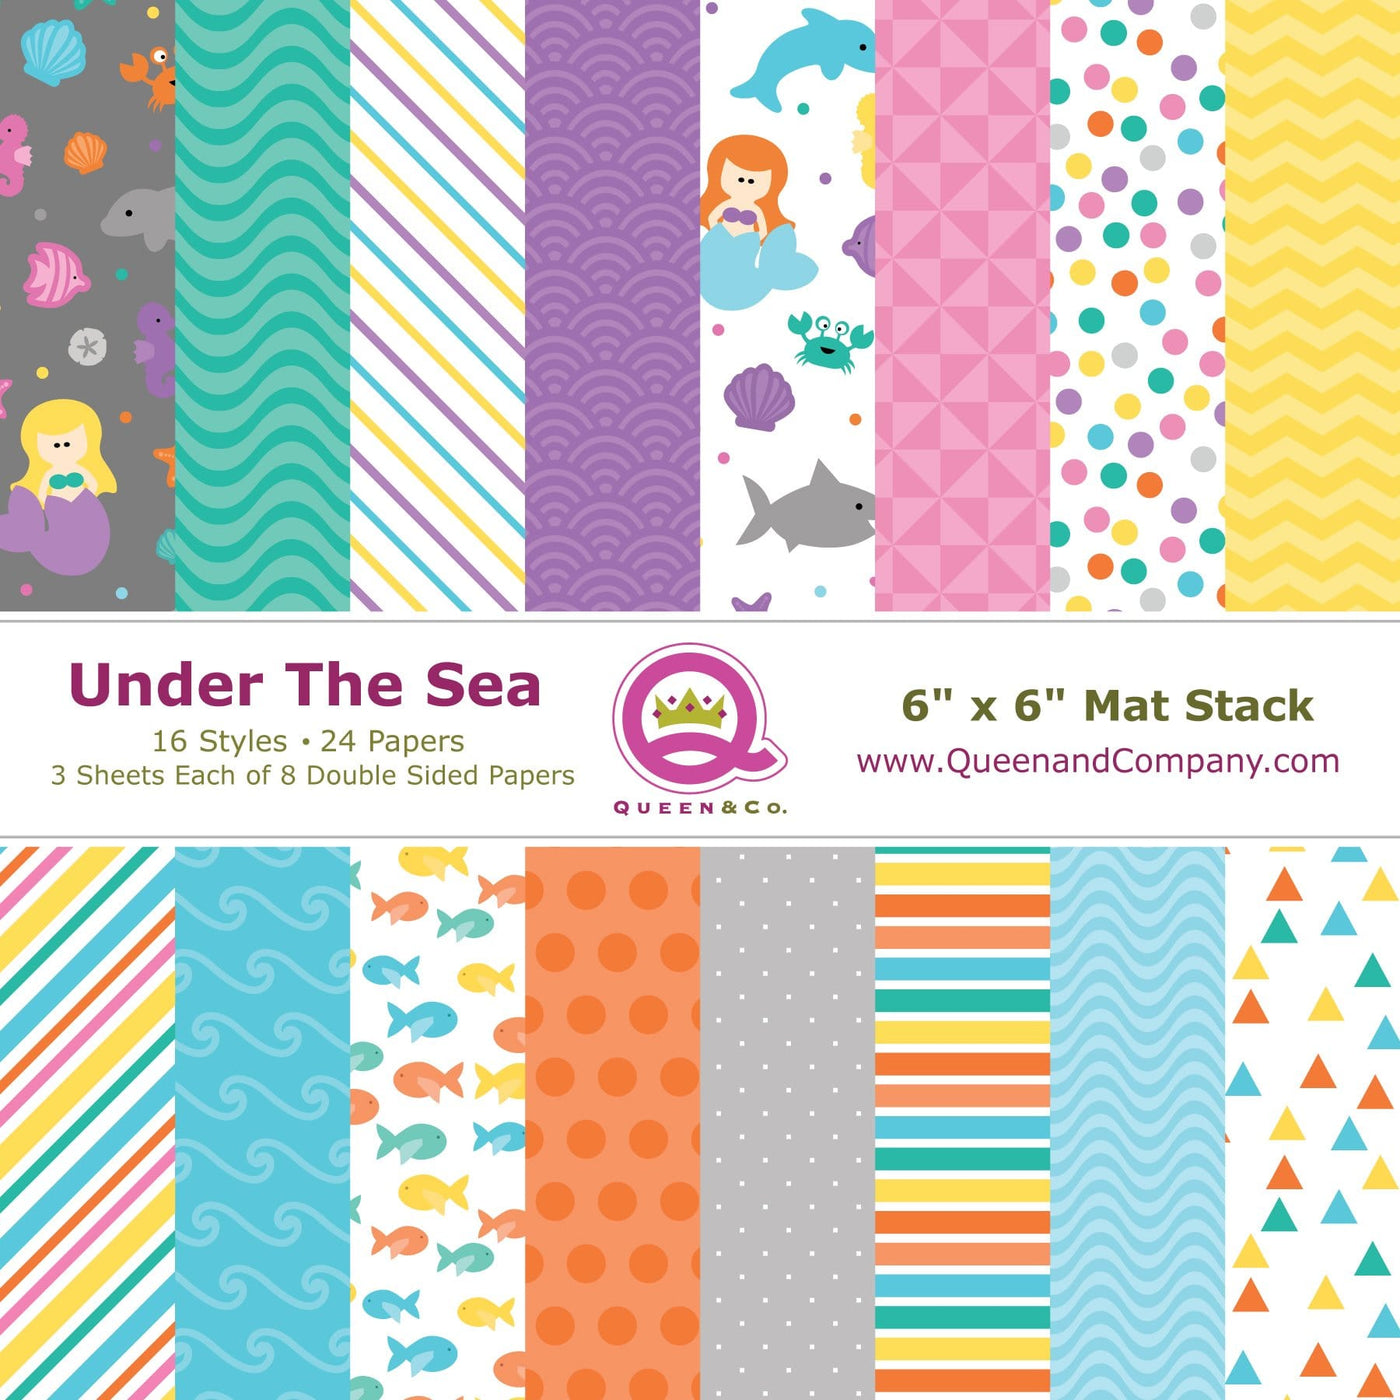 Under the Sea Paper Pad